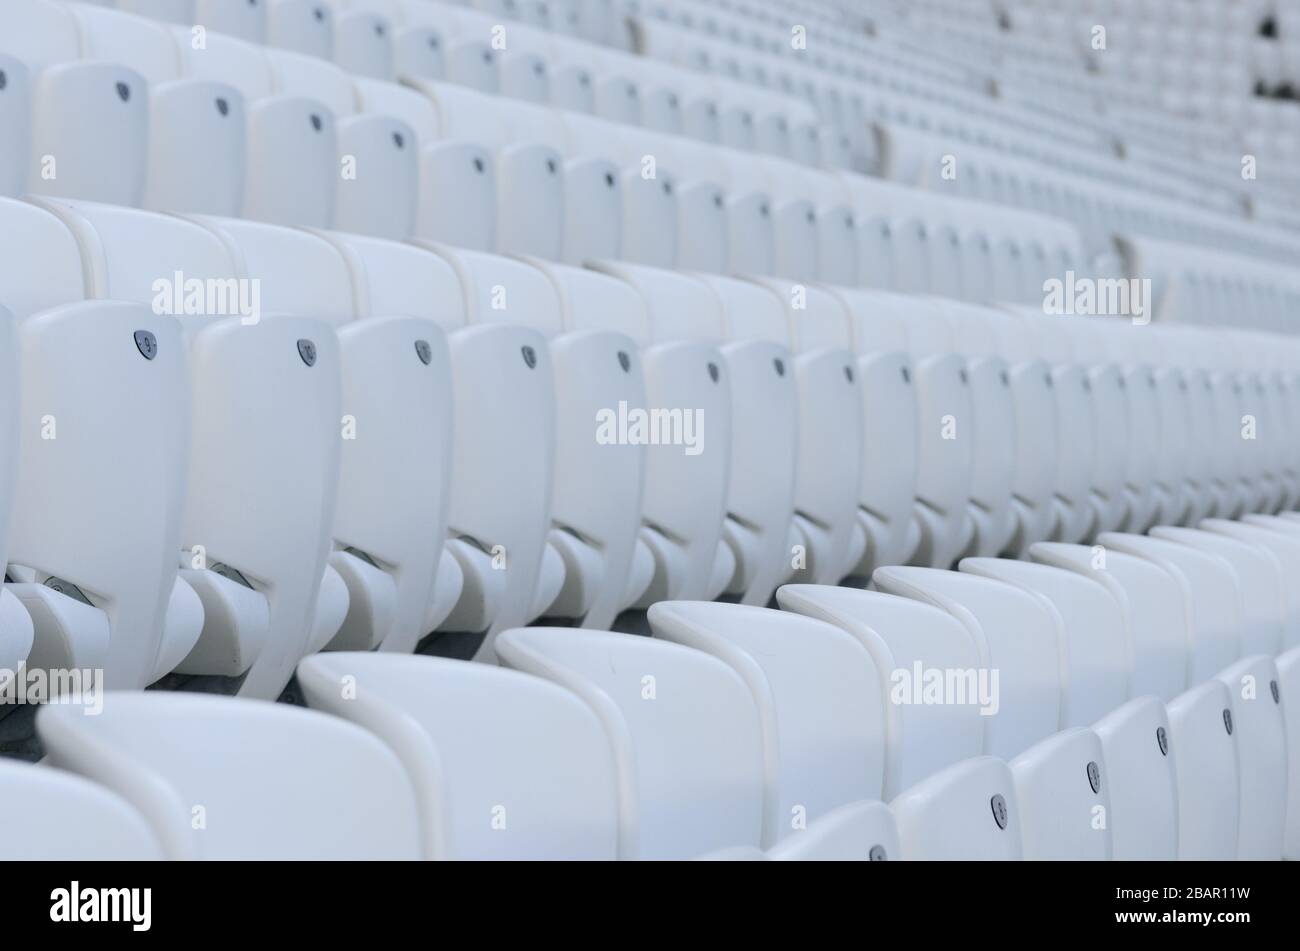 Empty white seats at the american football stadium during isolation period Stock Photo